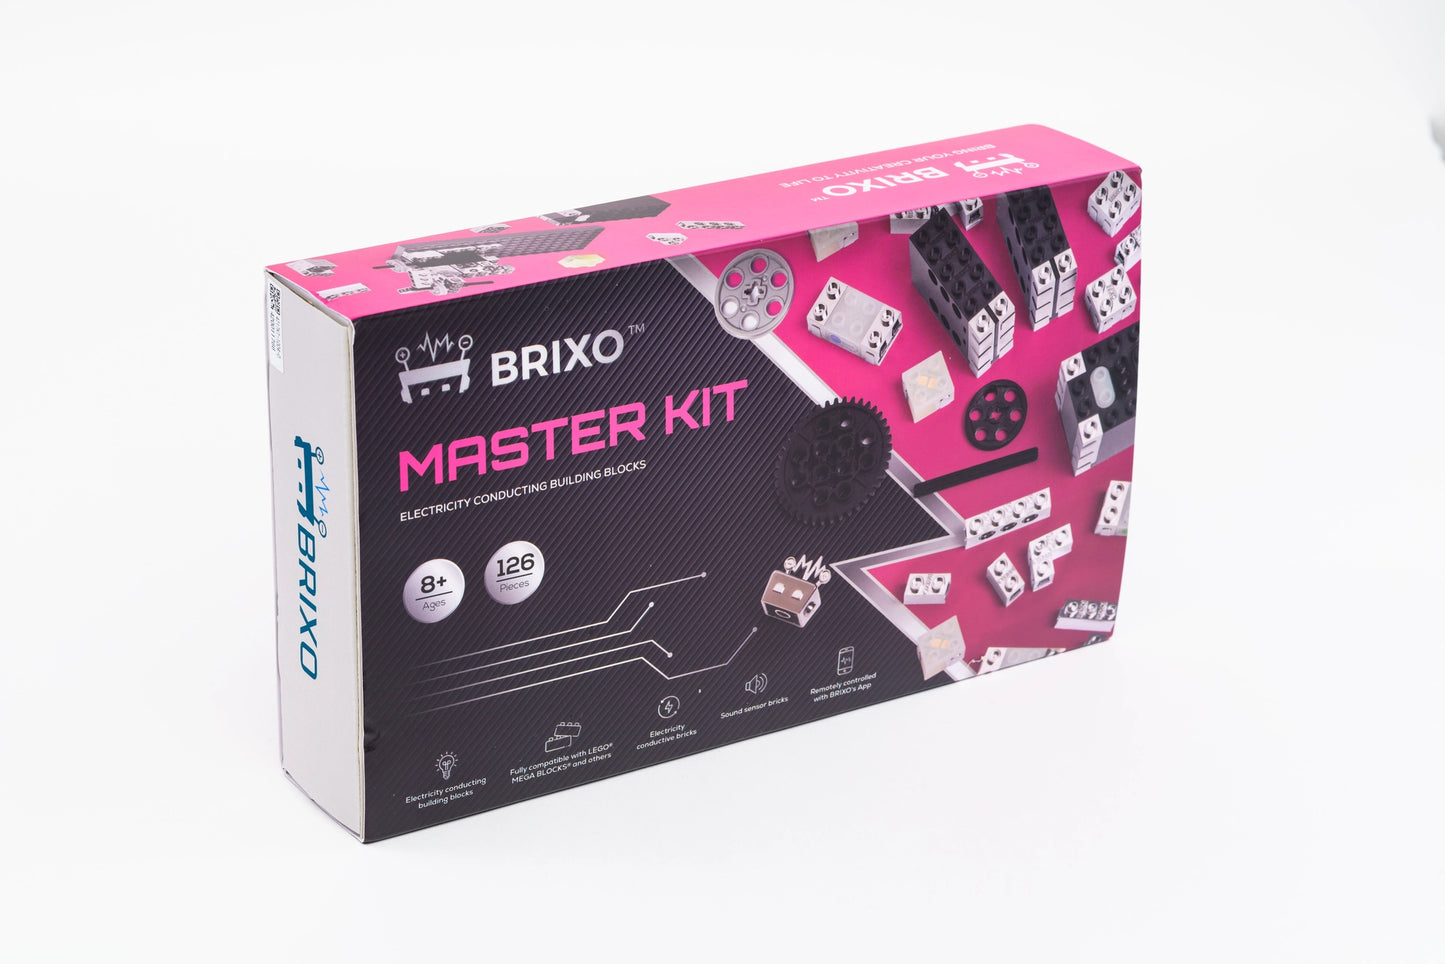 Brixo Master KIT, Electricity conducting Building Blocks, Fully Compatible with All LegoBricks and Models. Meet BRIXO - A New World of Creativity and Innovation. Bring Your LegoBricks to Life.